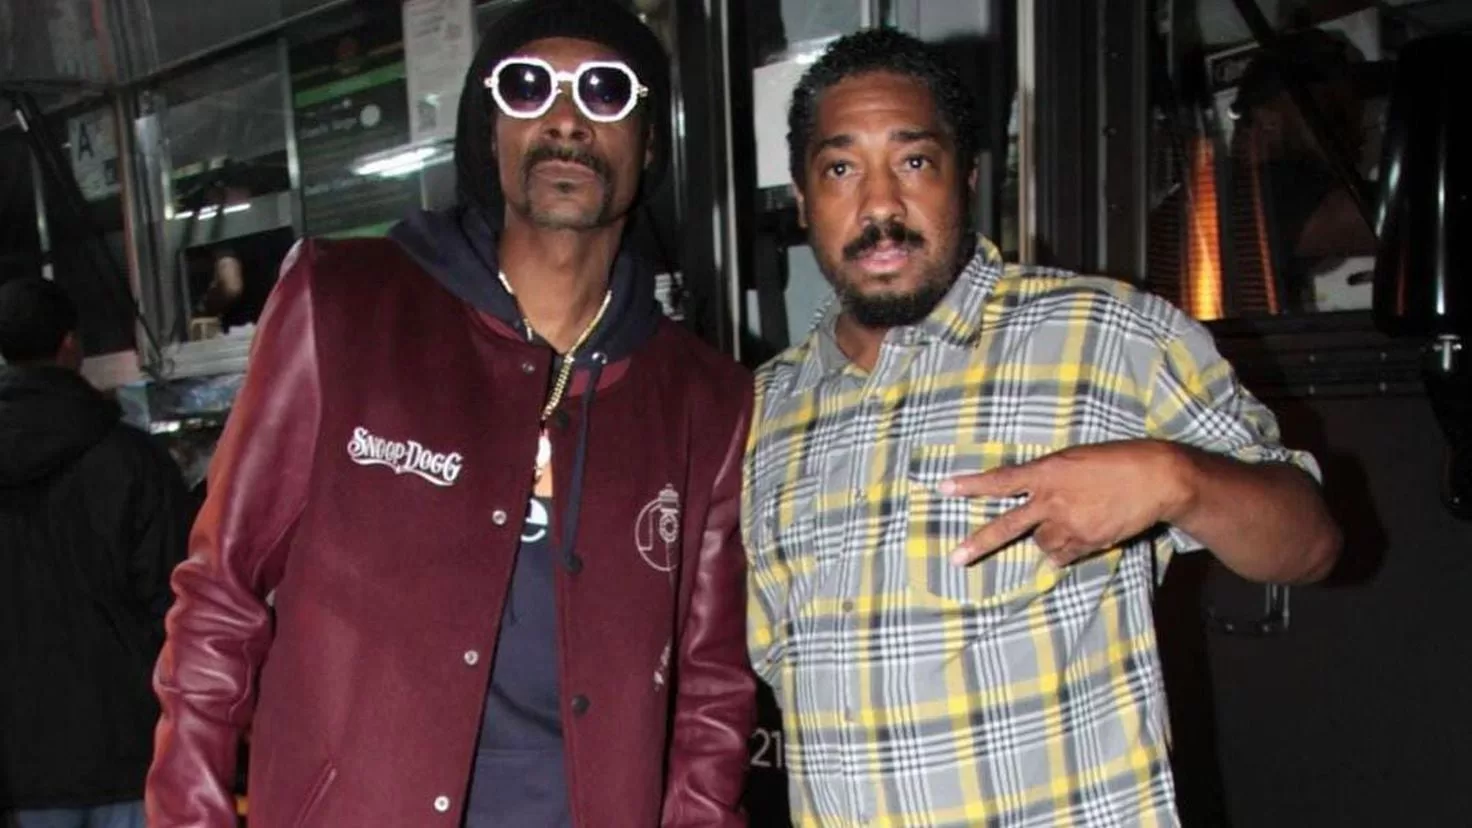 Snoop Dogg's brother dies at 44
